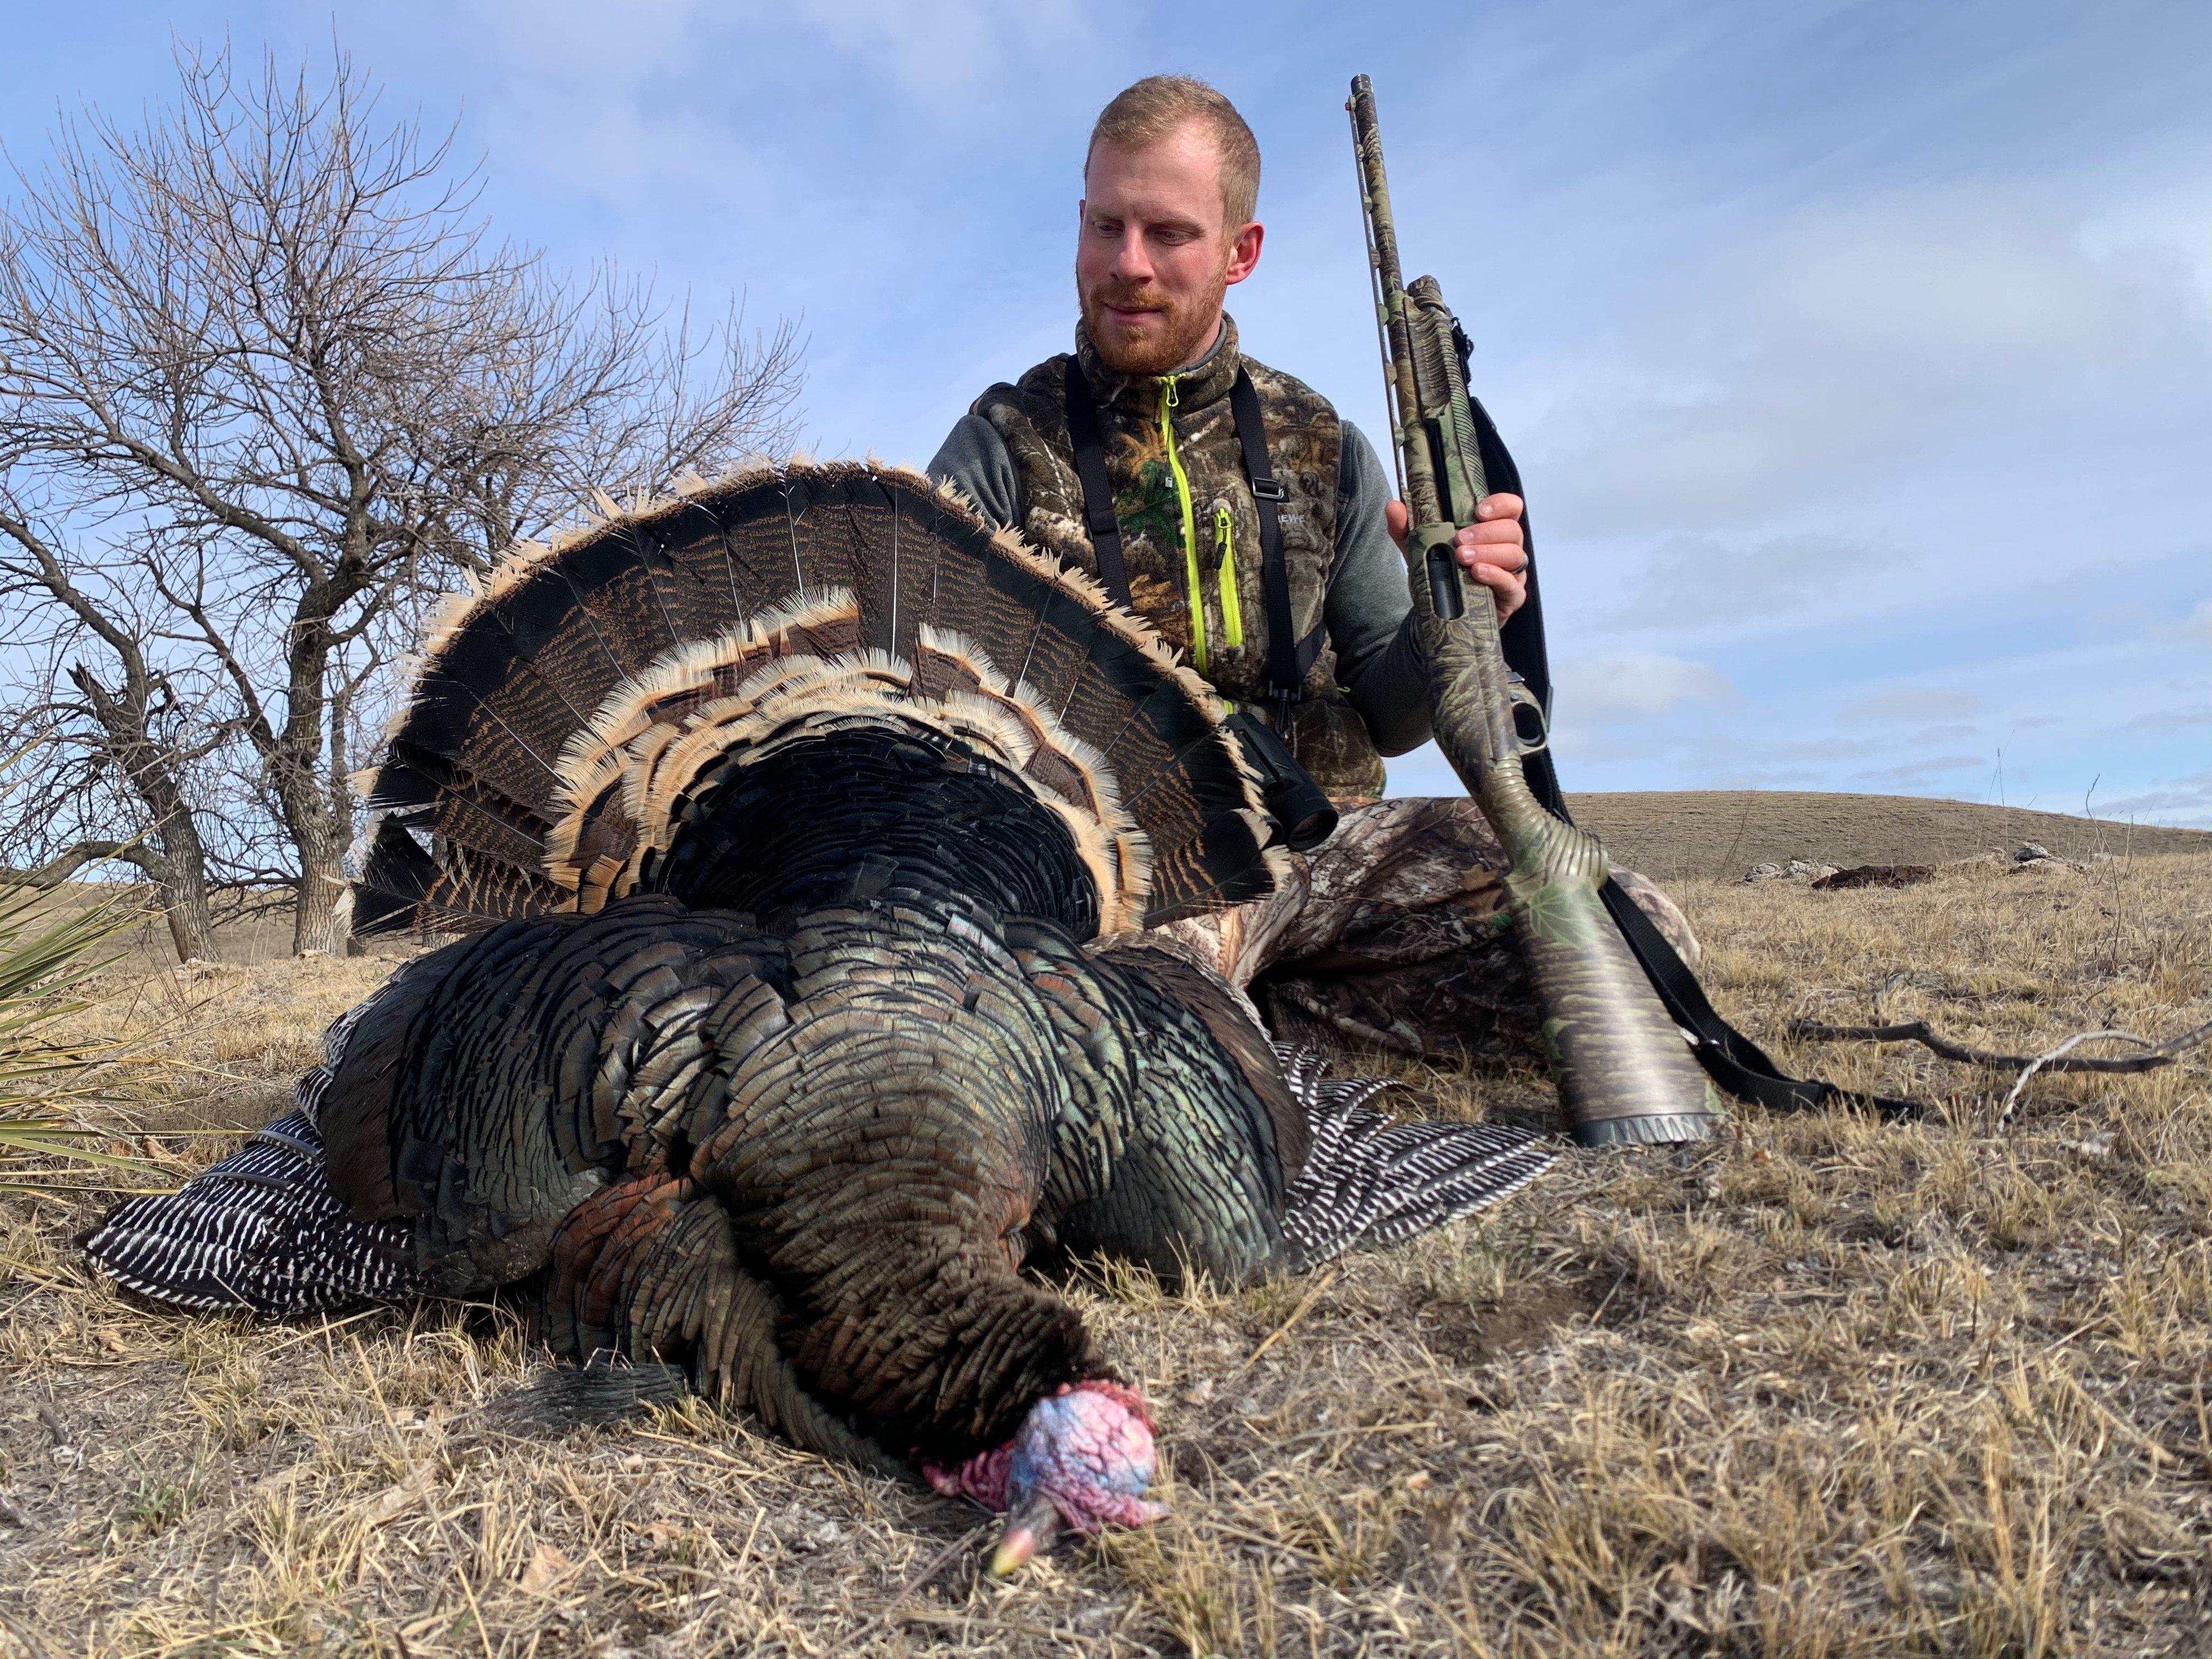 McDougal recently took an early bird on the plains. Moving forward, for at least the next week, he believes the intensity of gobbling action will hinge on weather. Image by Rebecca McDougal